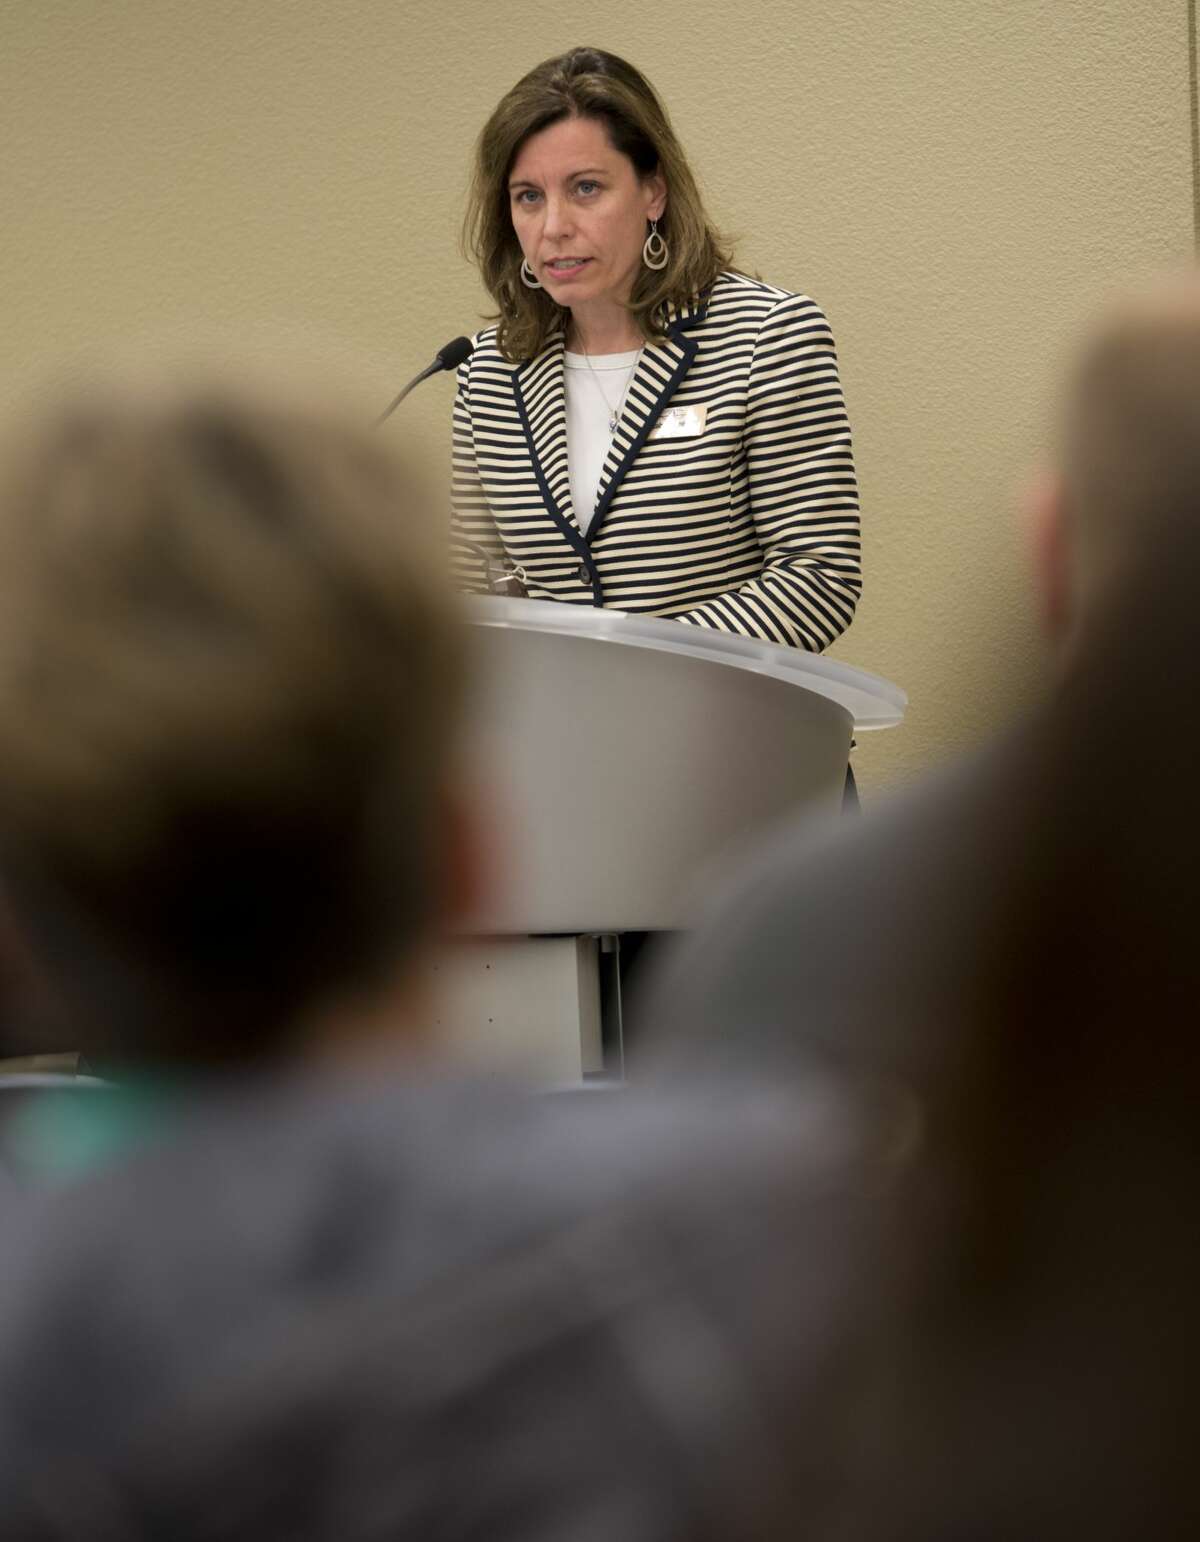 Candidtate for re-election to the 238th District Court Elizabeth Leonard answers questions 02/06/18 evening during a candidate forum at the Centennial Library. Tim Fischer/Reporter-Telegram